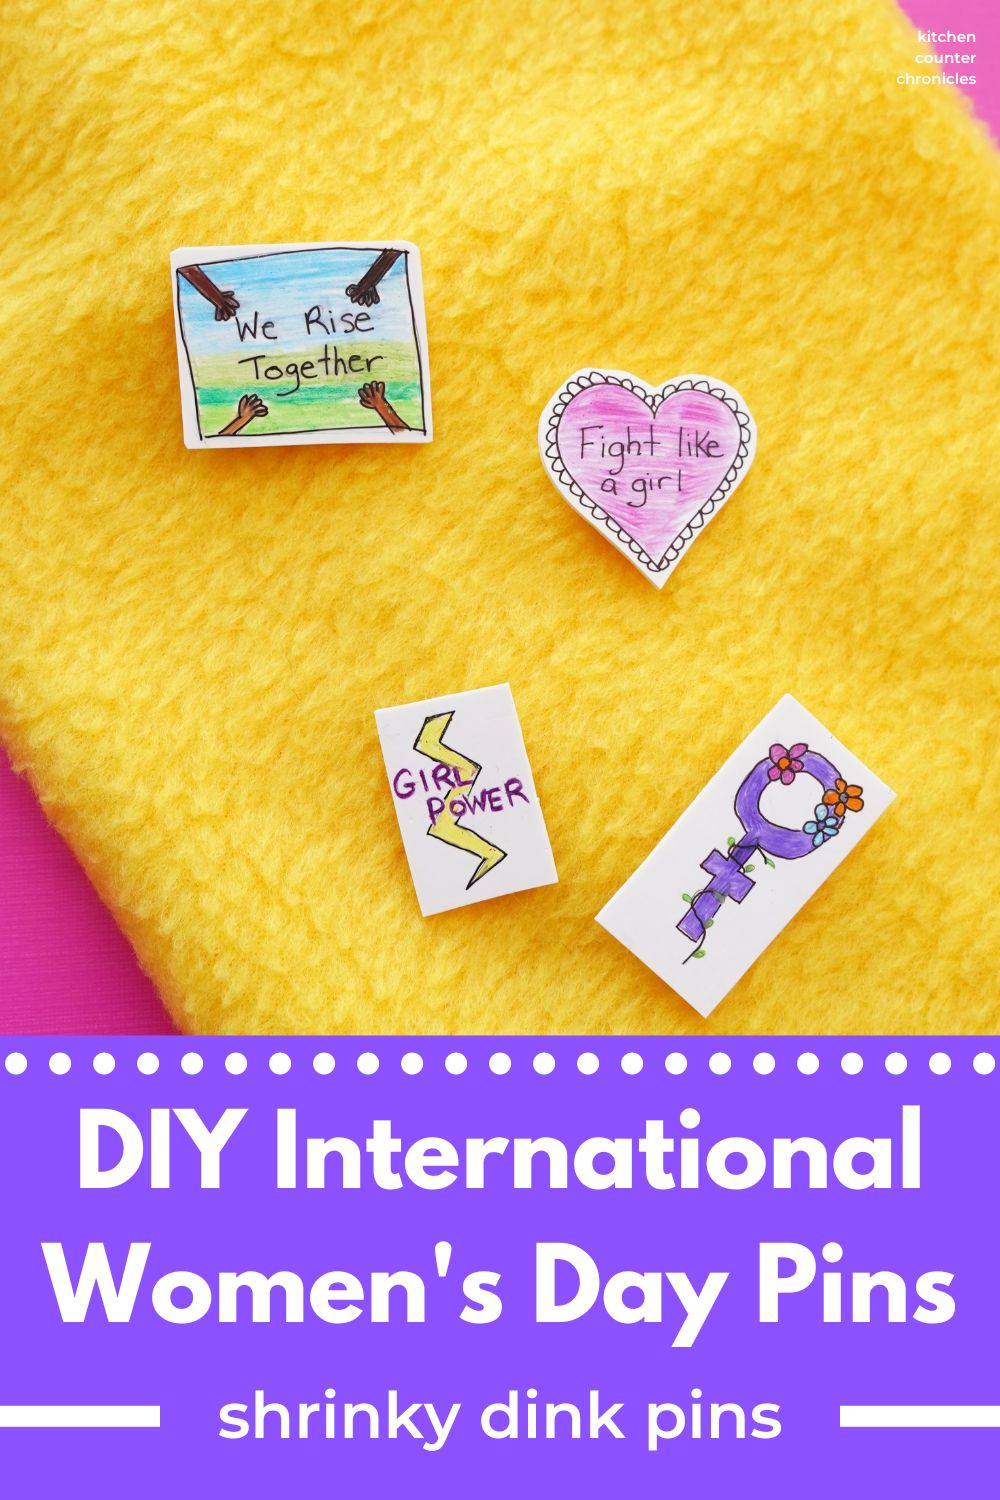 4 diy International Women's Day pins on a yellow scarf. One says "Girl Power", "Fight Like a Girl", "We Rise Together" and a purple woman symbol wrapped in flowers. With the title "DIY International Women's Day Pin - shrinky dink pin how to.